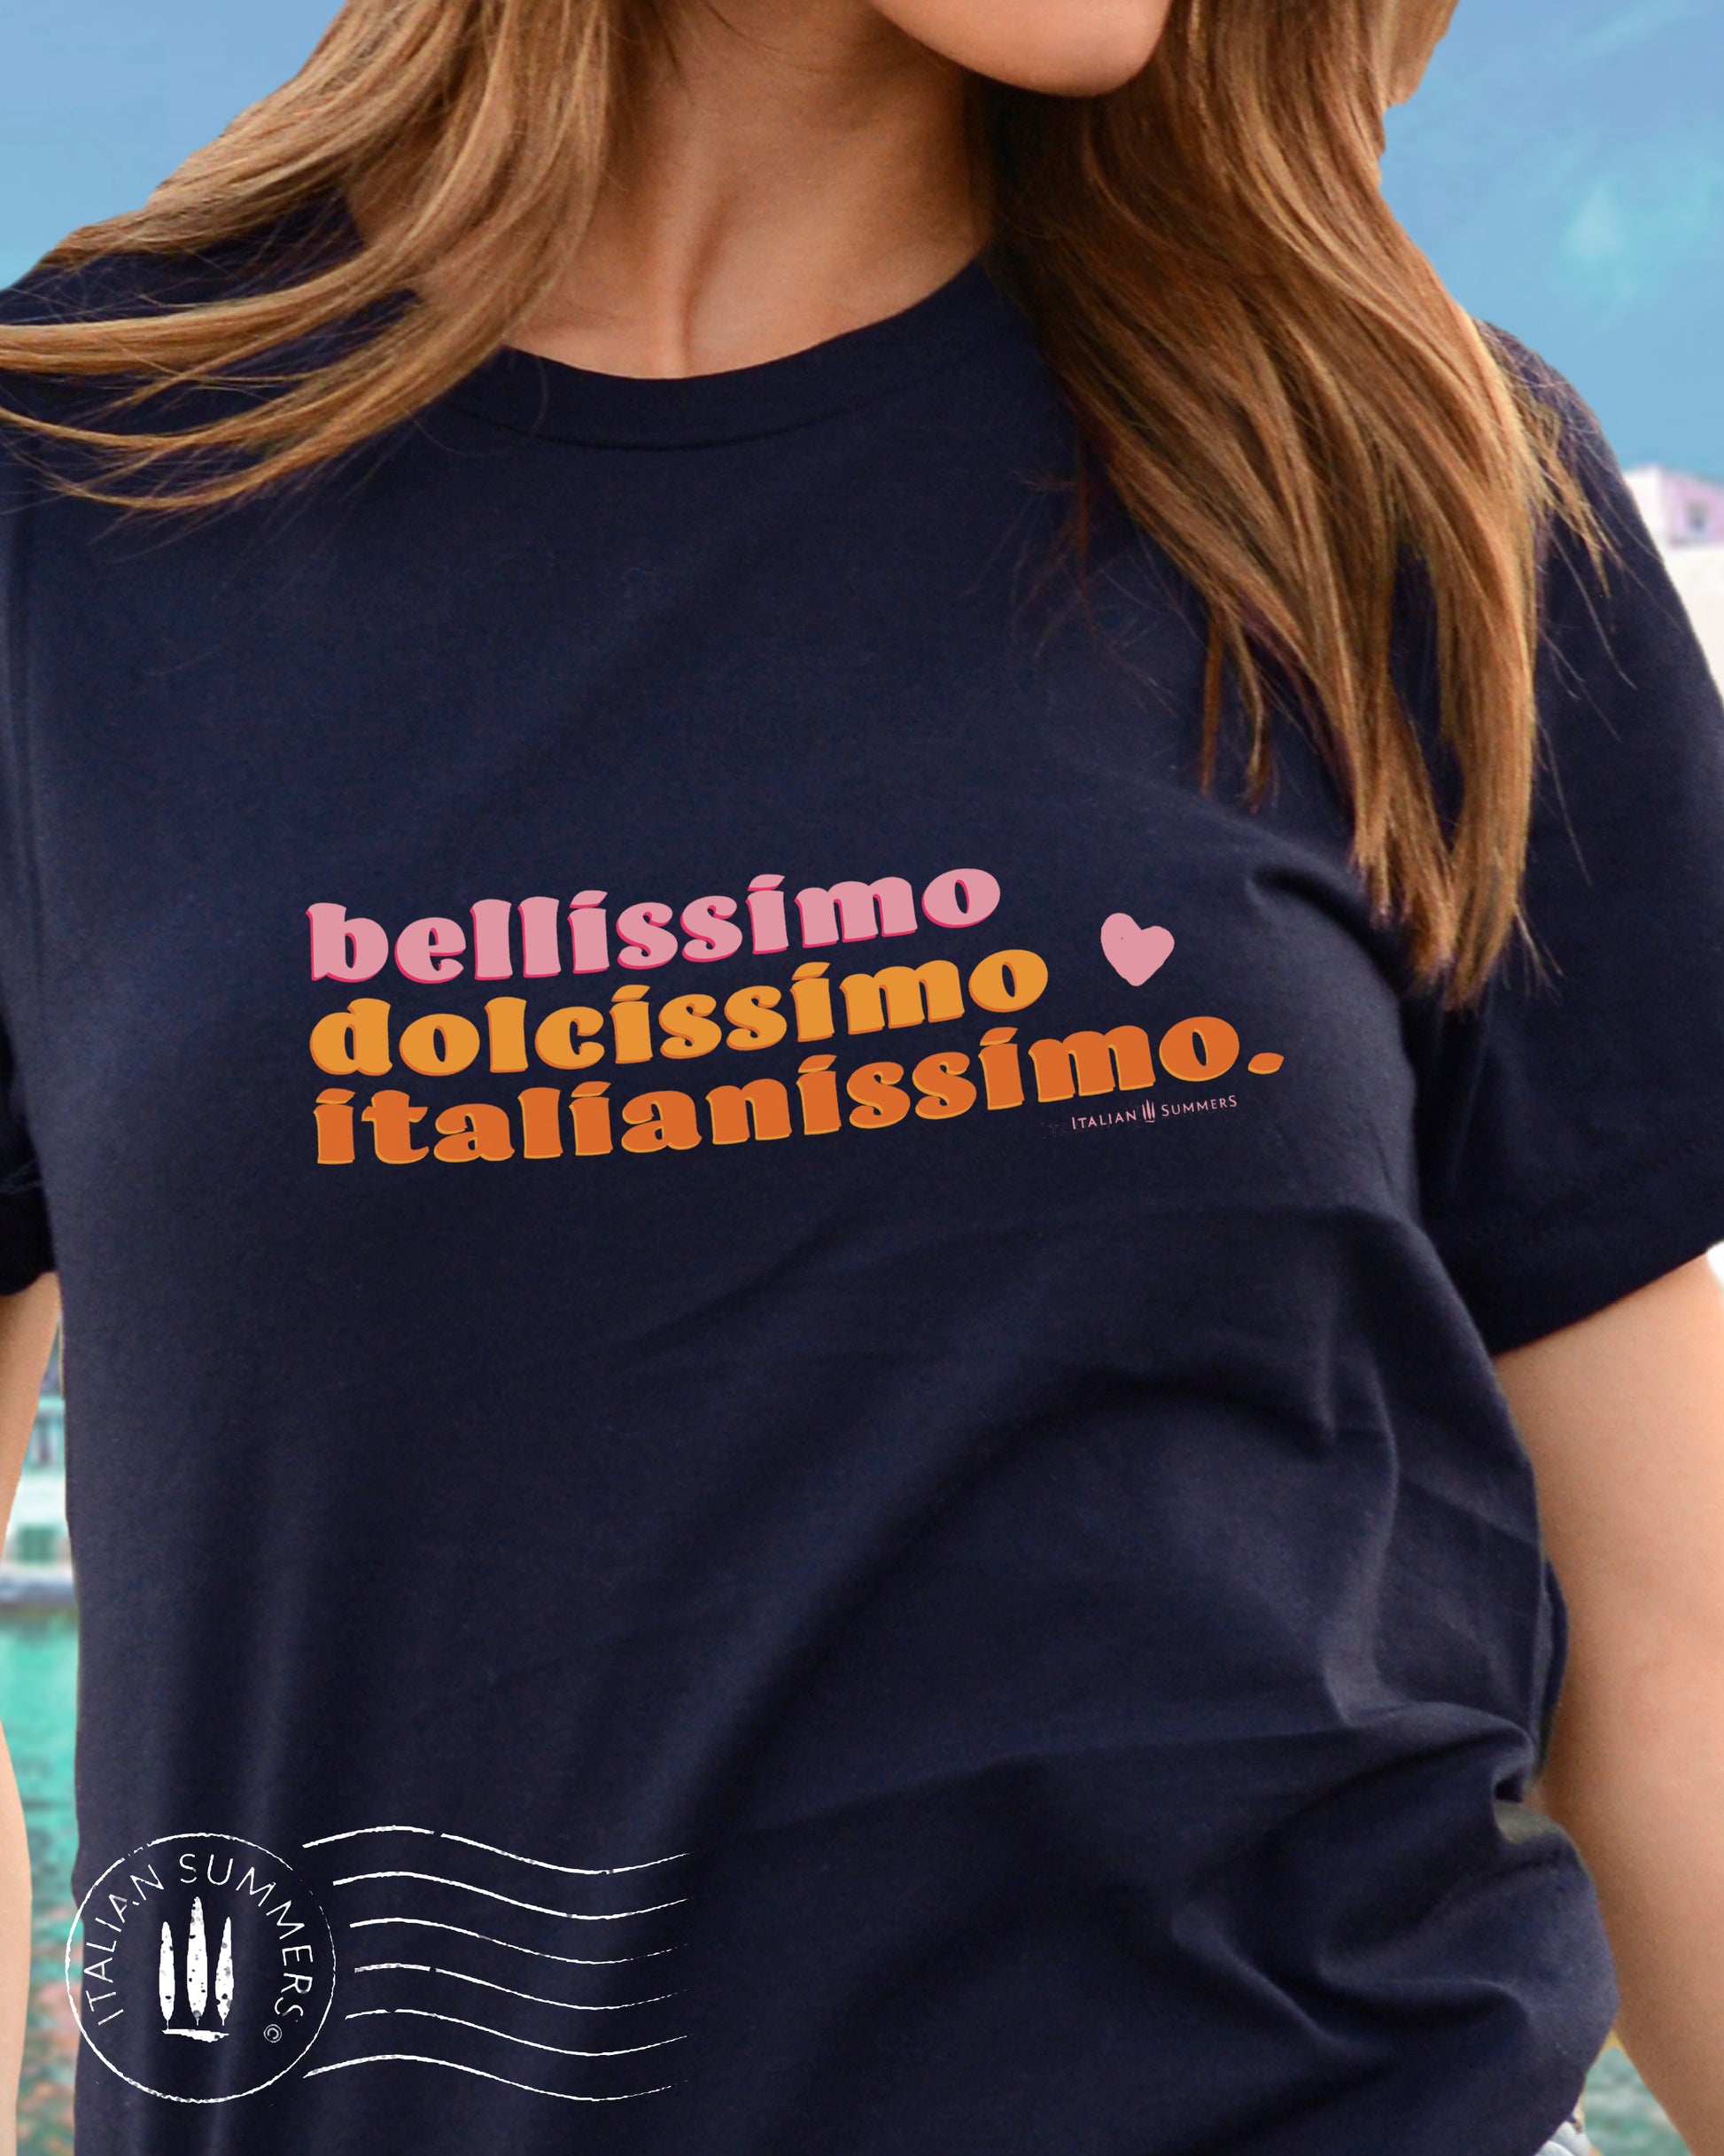 Italy inspired white cotton T shirt, crew-neck unisex shirt with the Italian phrase: "Bellissimo,dolcissimo, Italianissimo"  in soft pastel orange and pink colors from the 1970s design tradition.